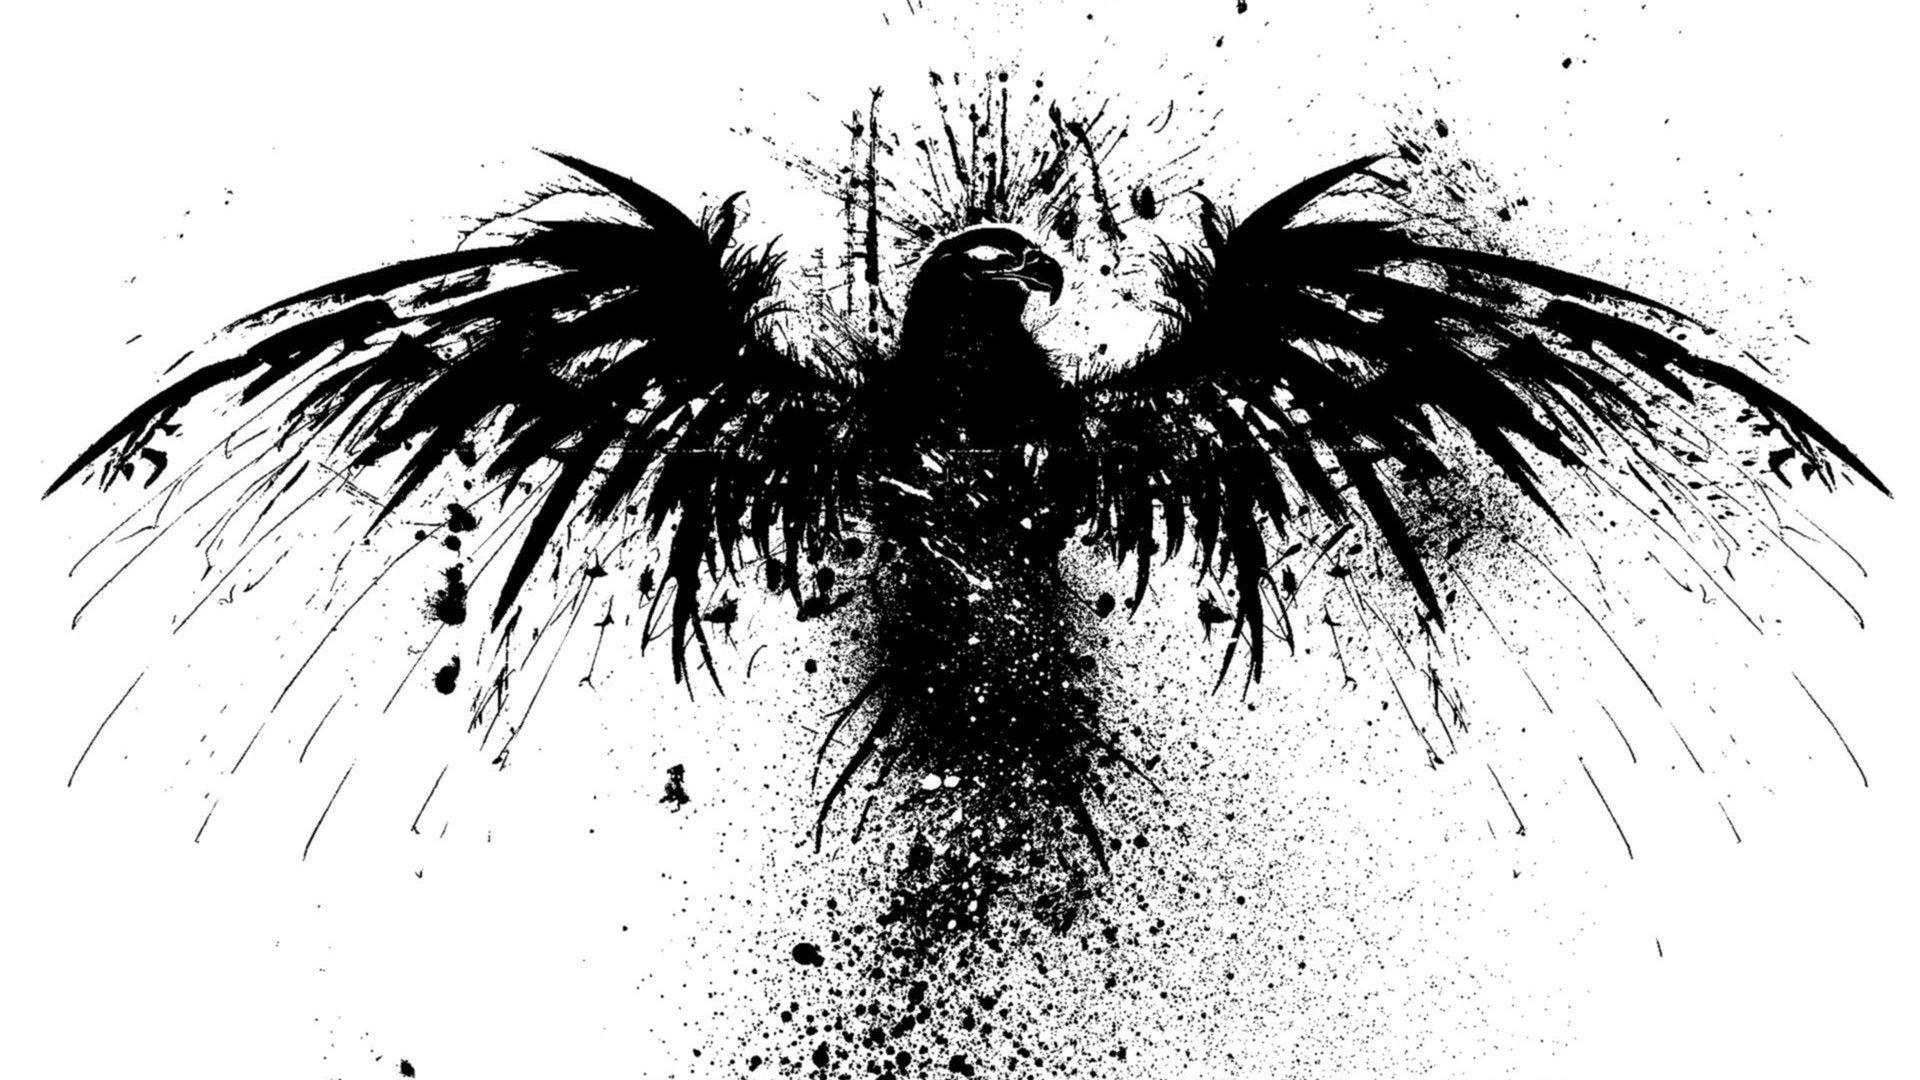 Black Eagle Wallpapers - Top Free Black Eagle Backgrounds - WallpaperAccess